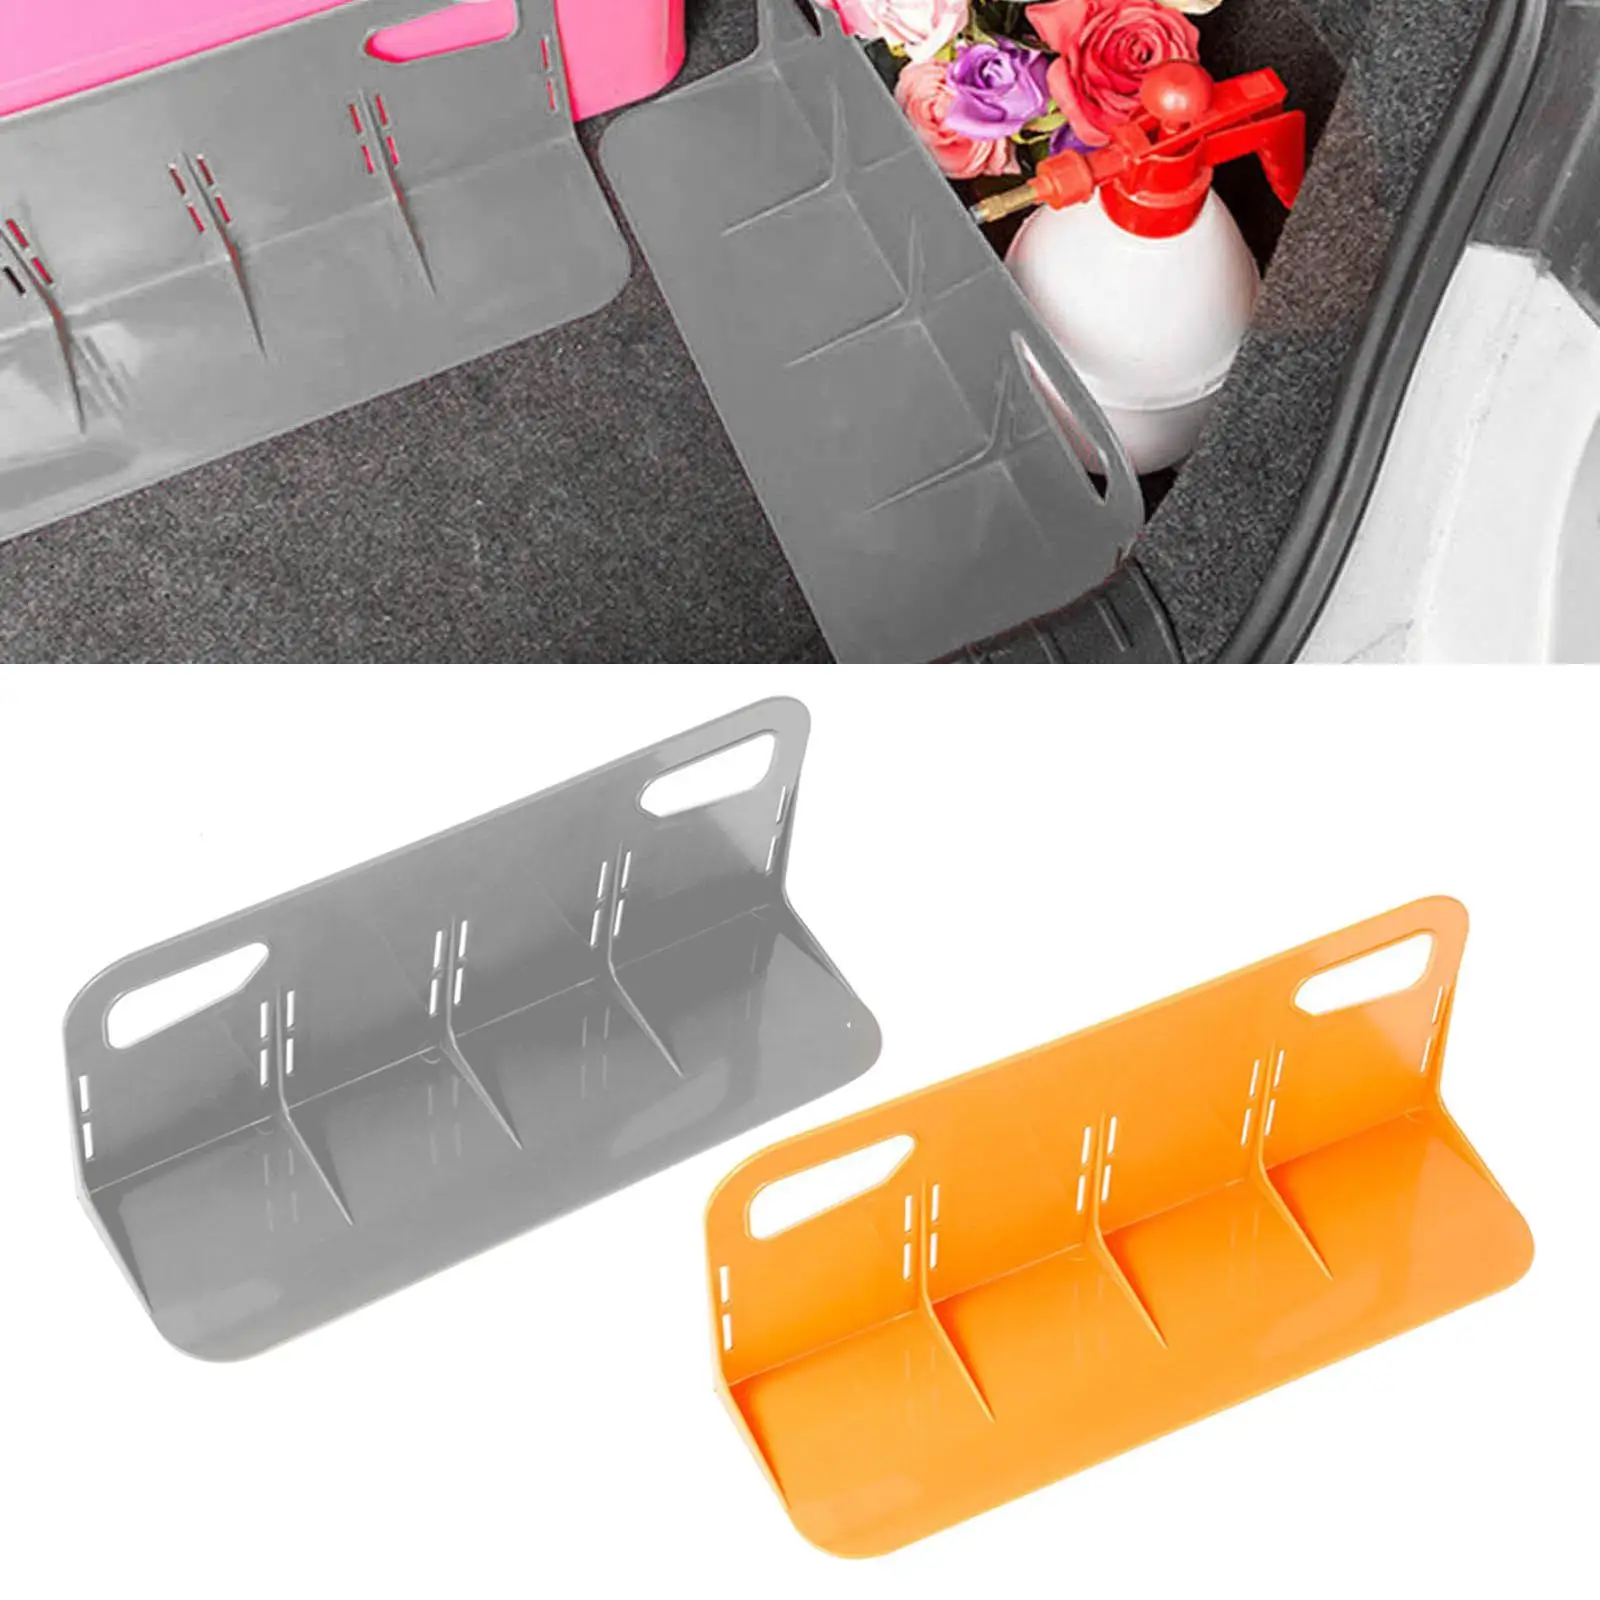 Auto Trunk Fixed Rack Stand Anti Slip L Shape Rear Racks Fixed Sundry Rack Trunk Organizer Fixed Rack for for Car Storage